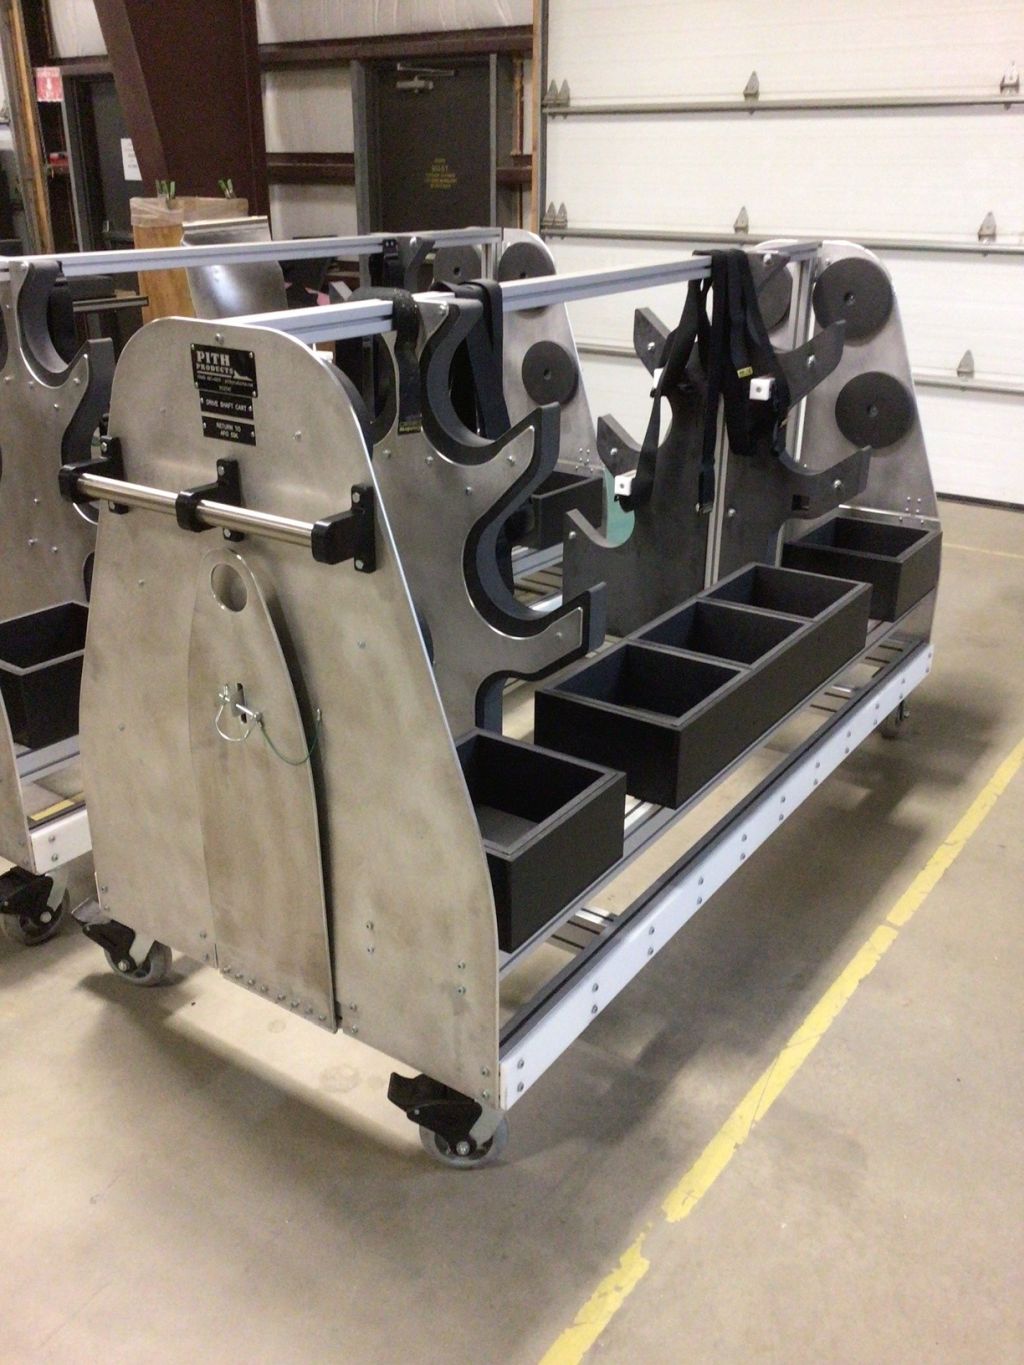 Assembly carts allow OEM and MRO teams to easily transport items to workstations